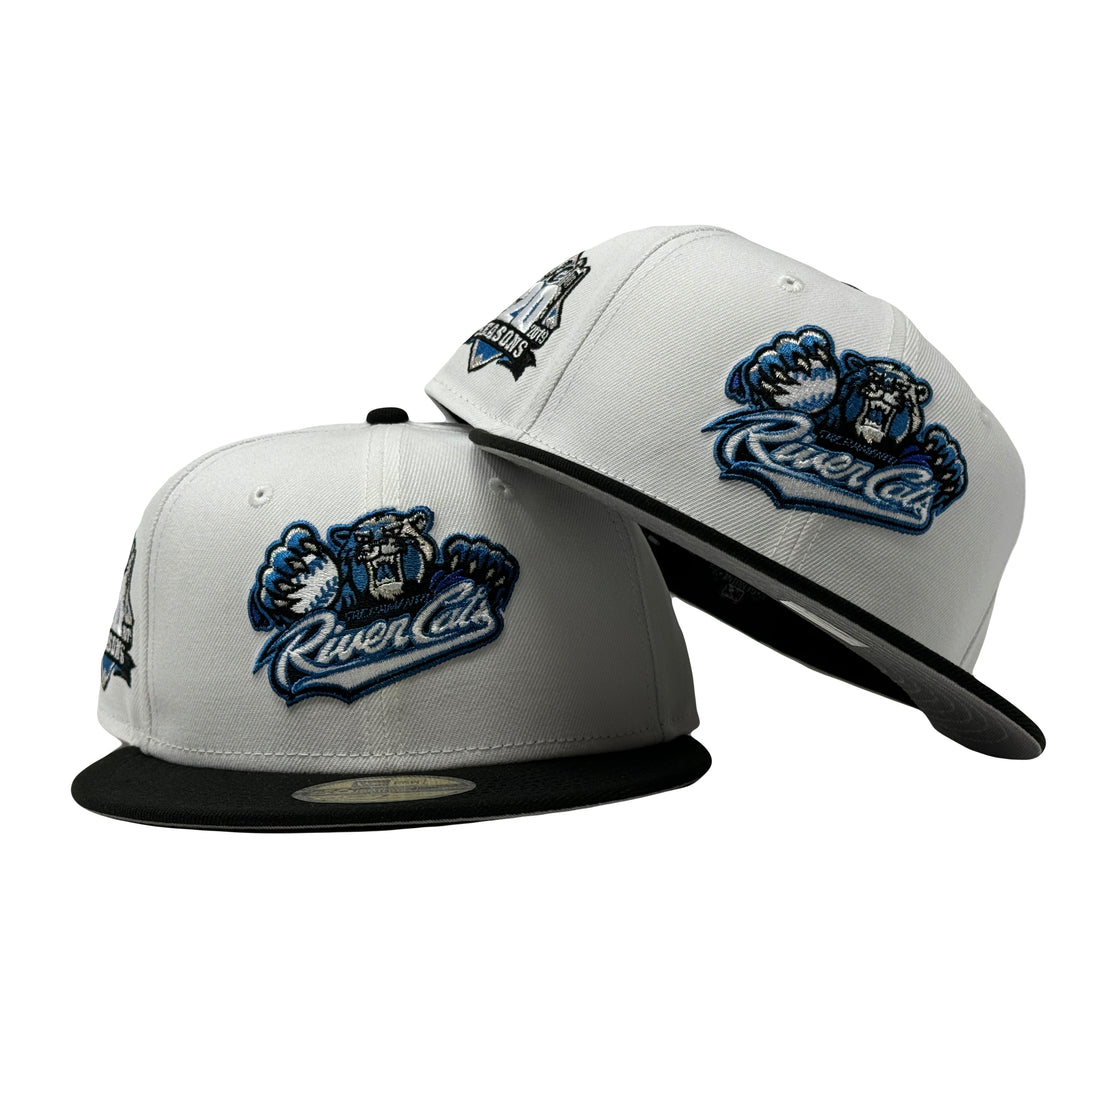 Sacramento River Cats 20th Anniversary 59Fifty New Era Fitted Hat